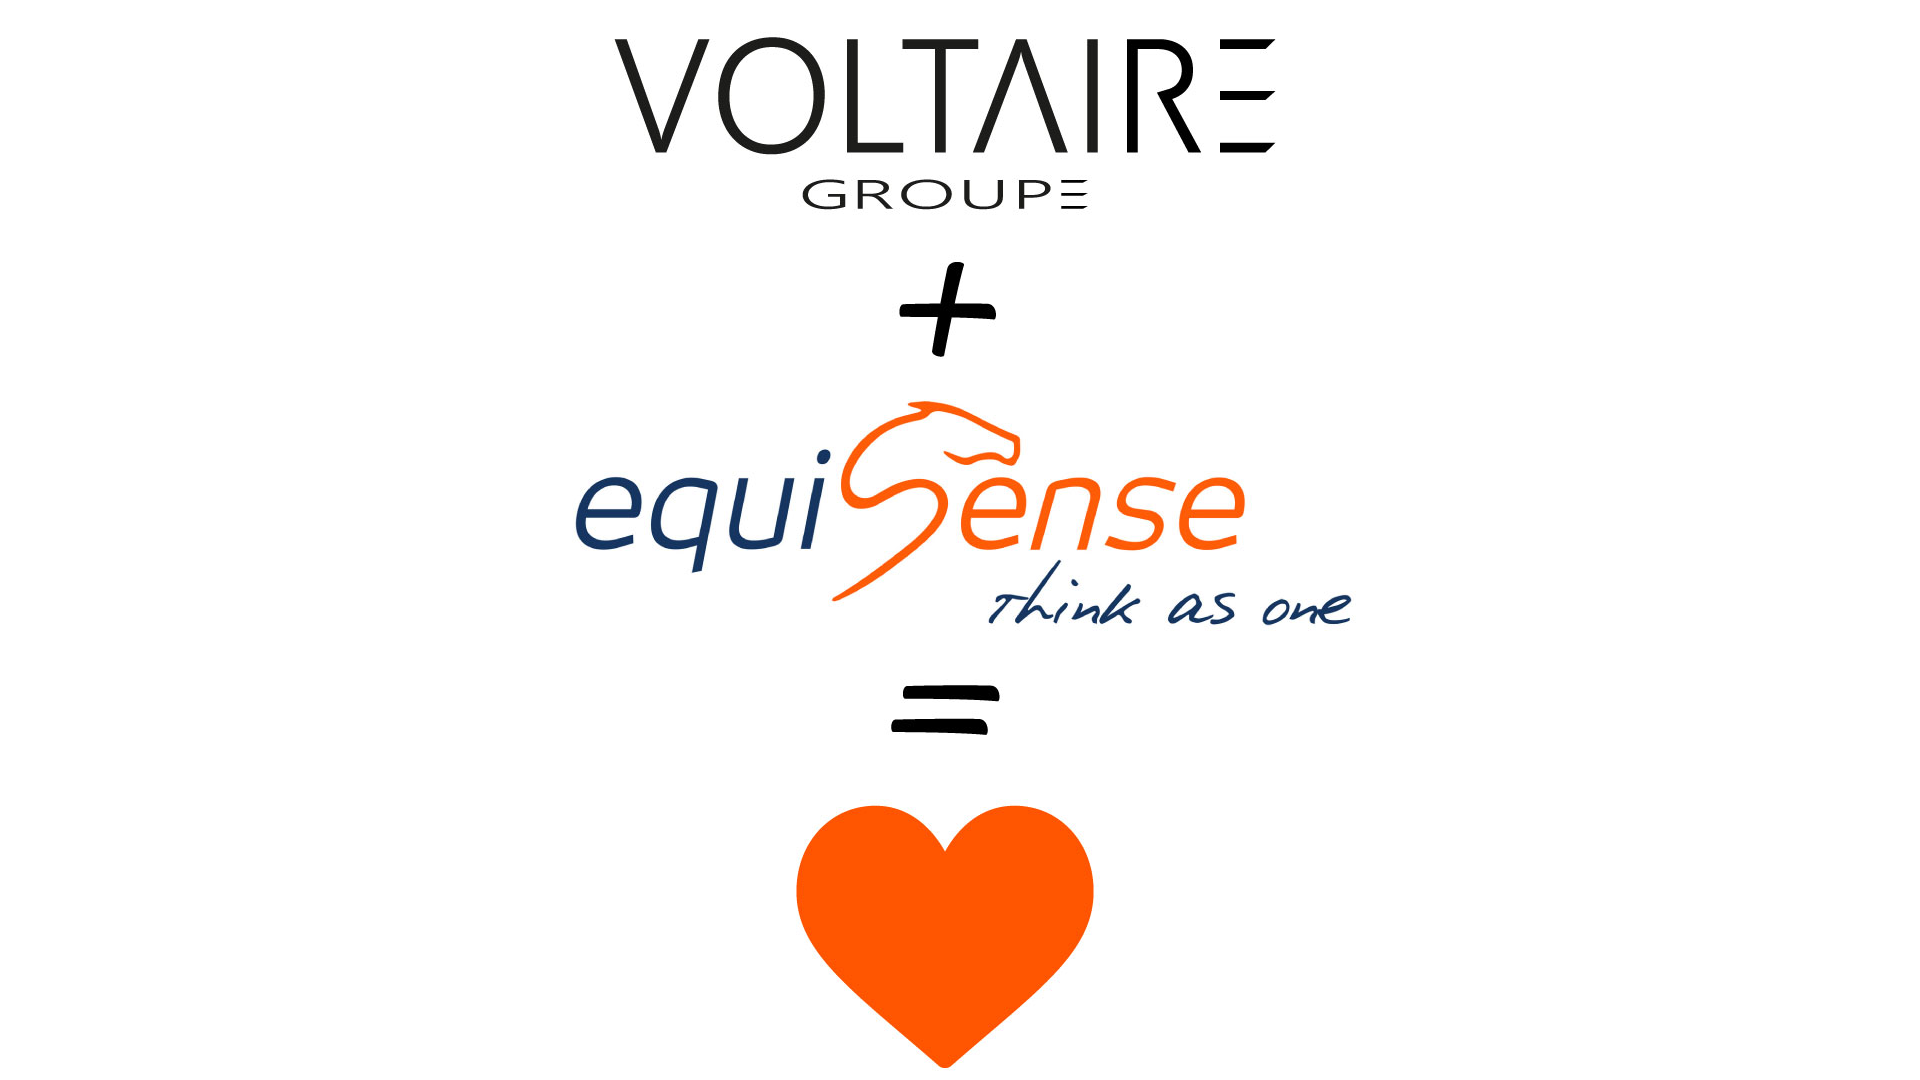 Equisense join the Voltaire family - image